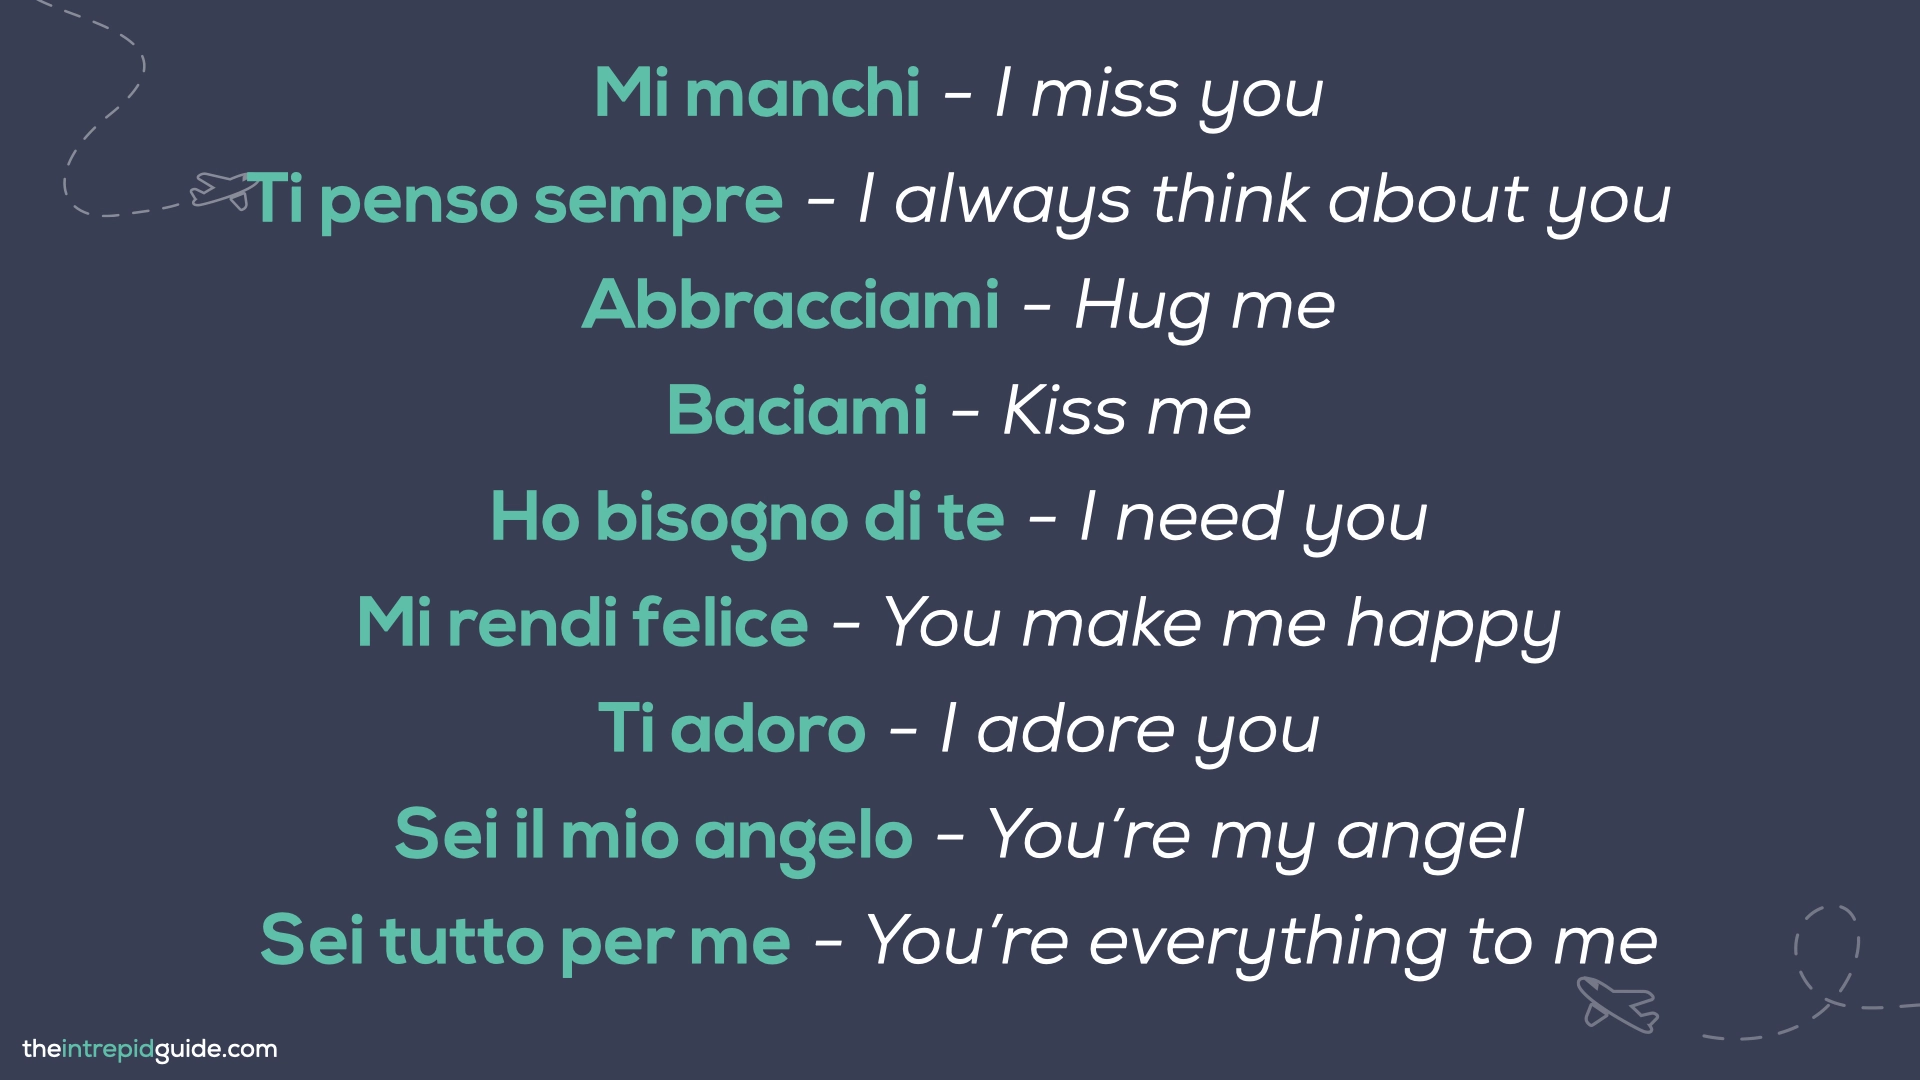 How to say 'I love you' in Italian - Common phrases